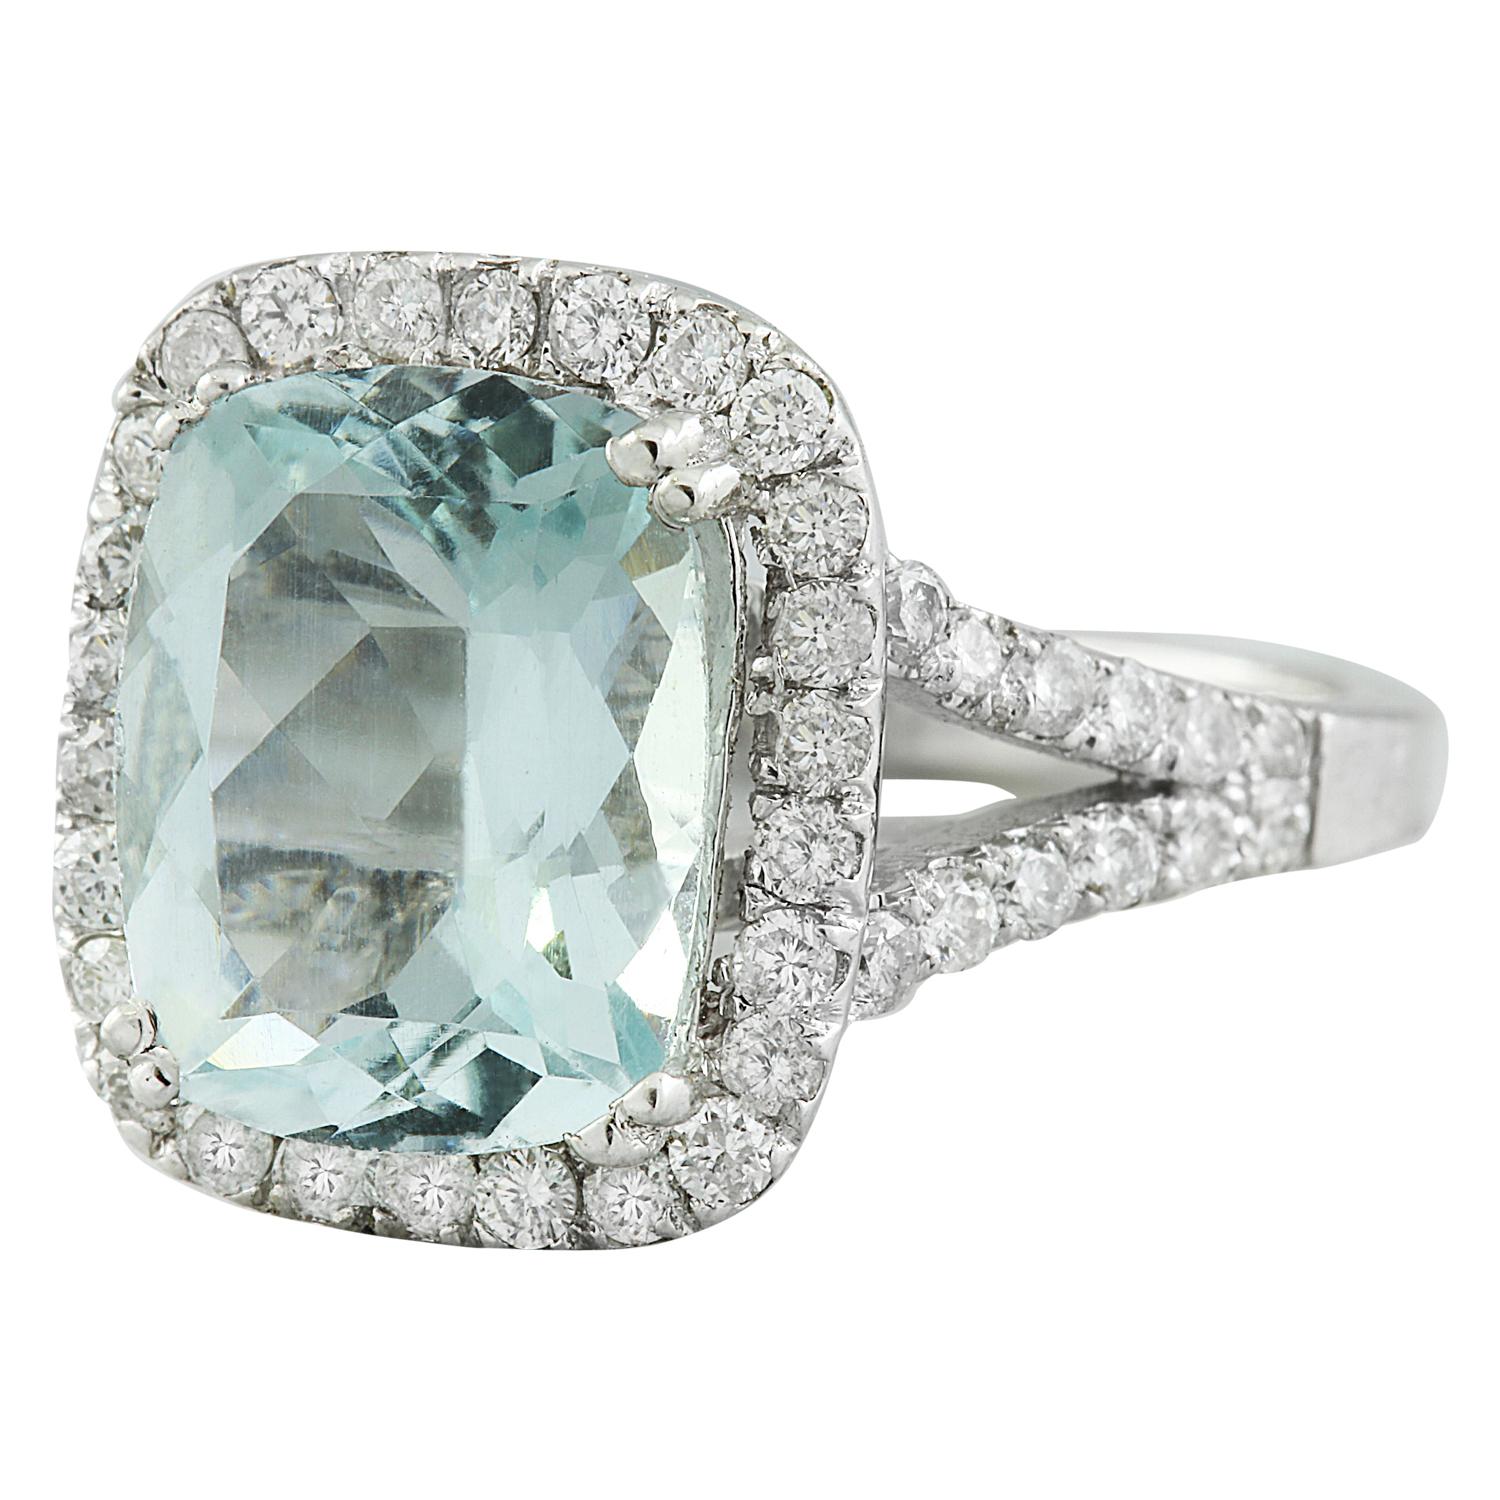 3.90 Carat Natural Aquamarine 14 Karat Solid White Gold Diamond Ring
Stamped: 14K 
Total Ring Weight: 4.7 Grams 
Aquamarine Weight: 3.20 Carat (11.00x9.00 Millimeters)  
Diamond Weight: 0.70 Carat (F-G Color, VS2-SI1 Clarity)
Quantity: 50
Face